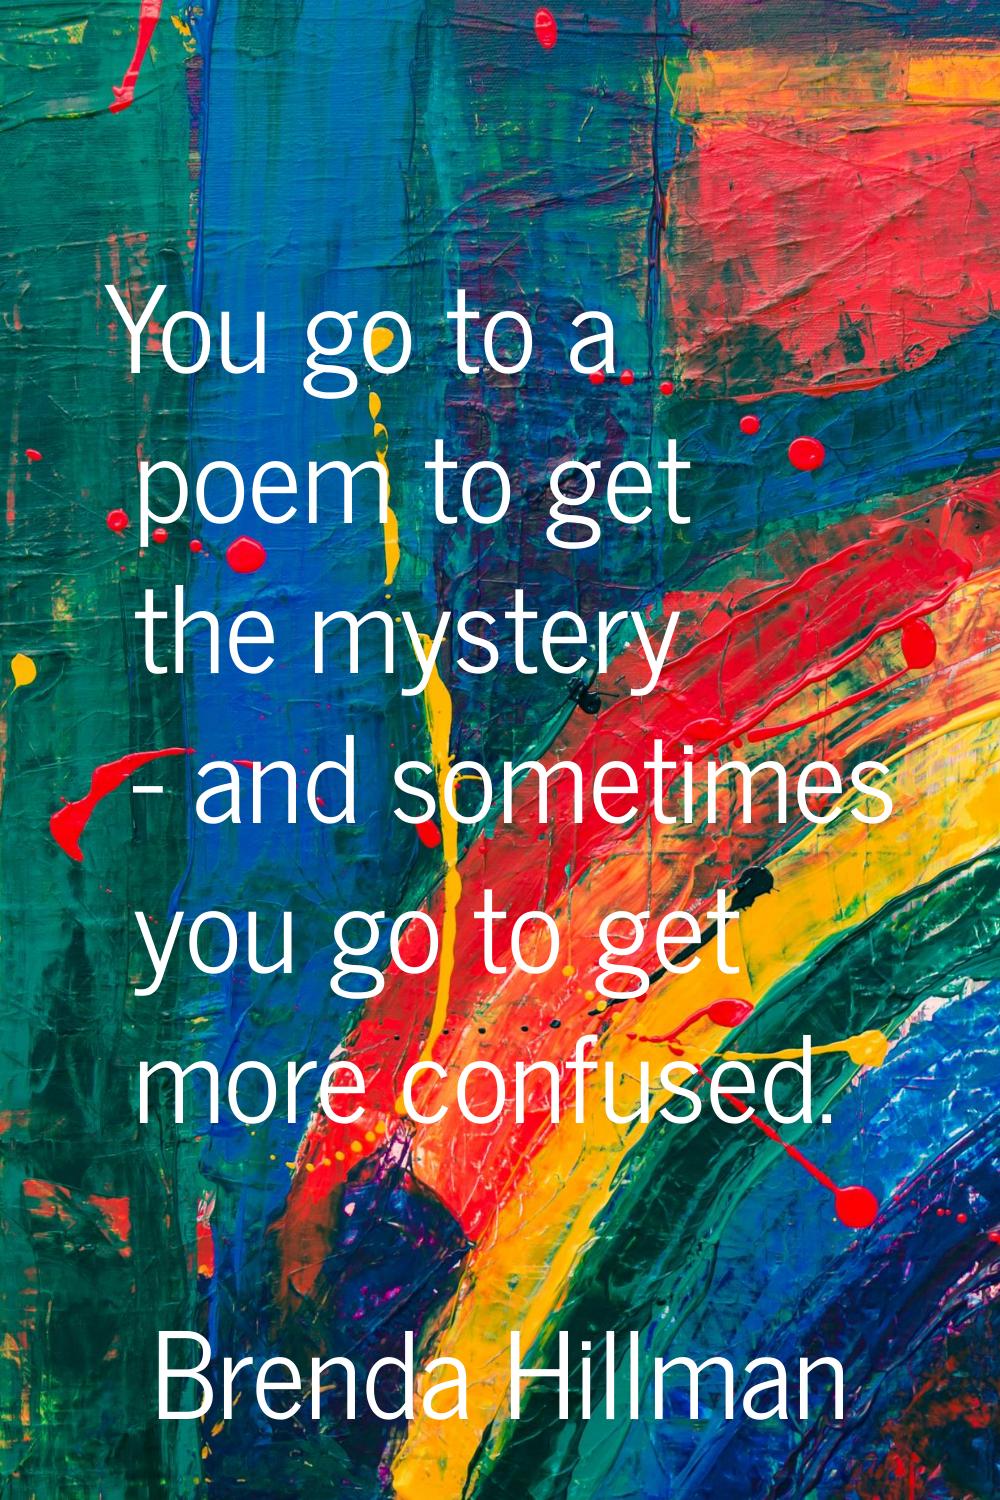 You go to a poem to get the mystery - and sometimes you go to get more confused.